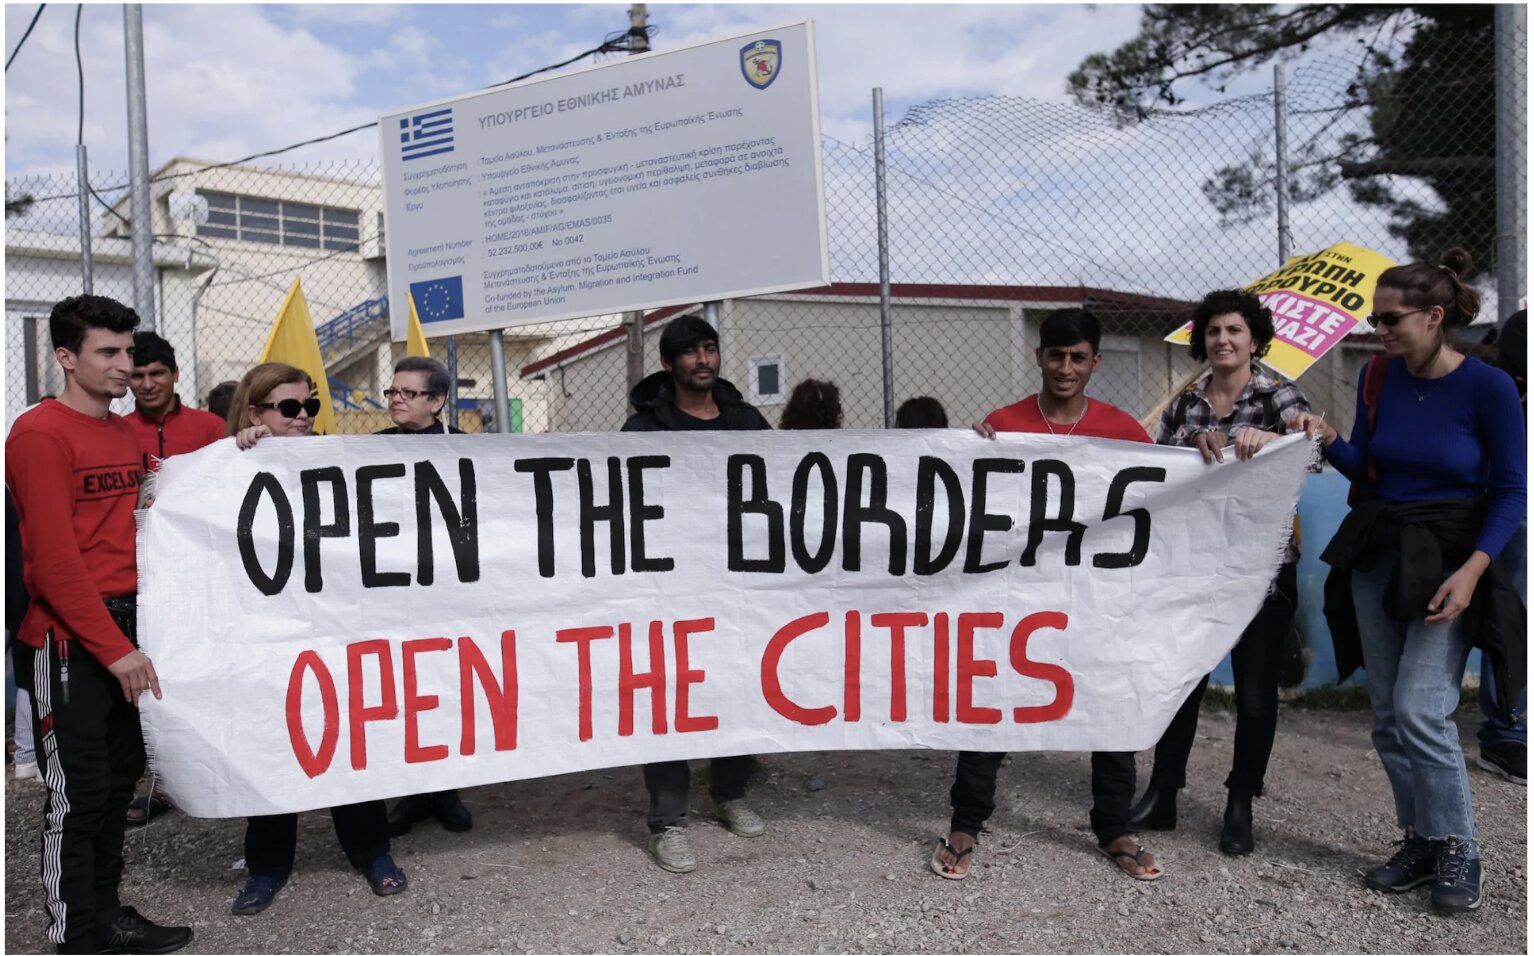 New dedicated migrant bus route prompts outrage in Greece.